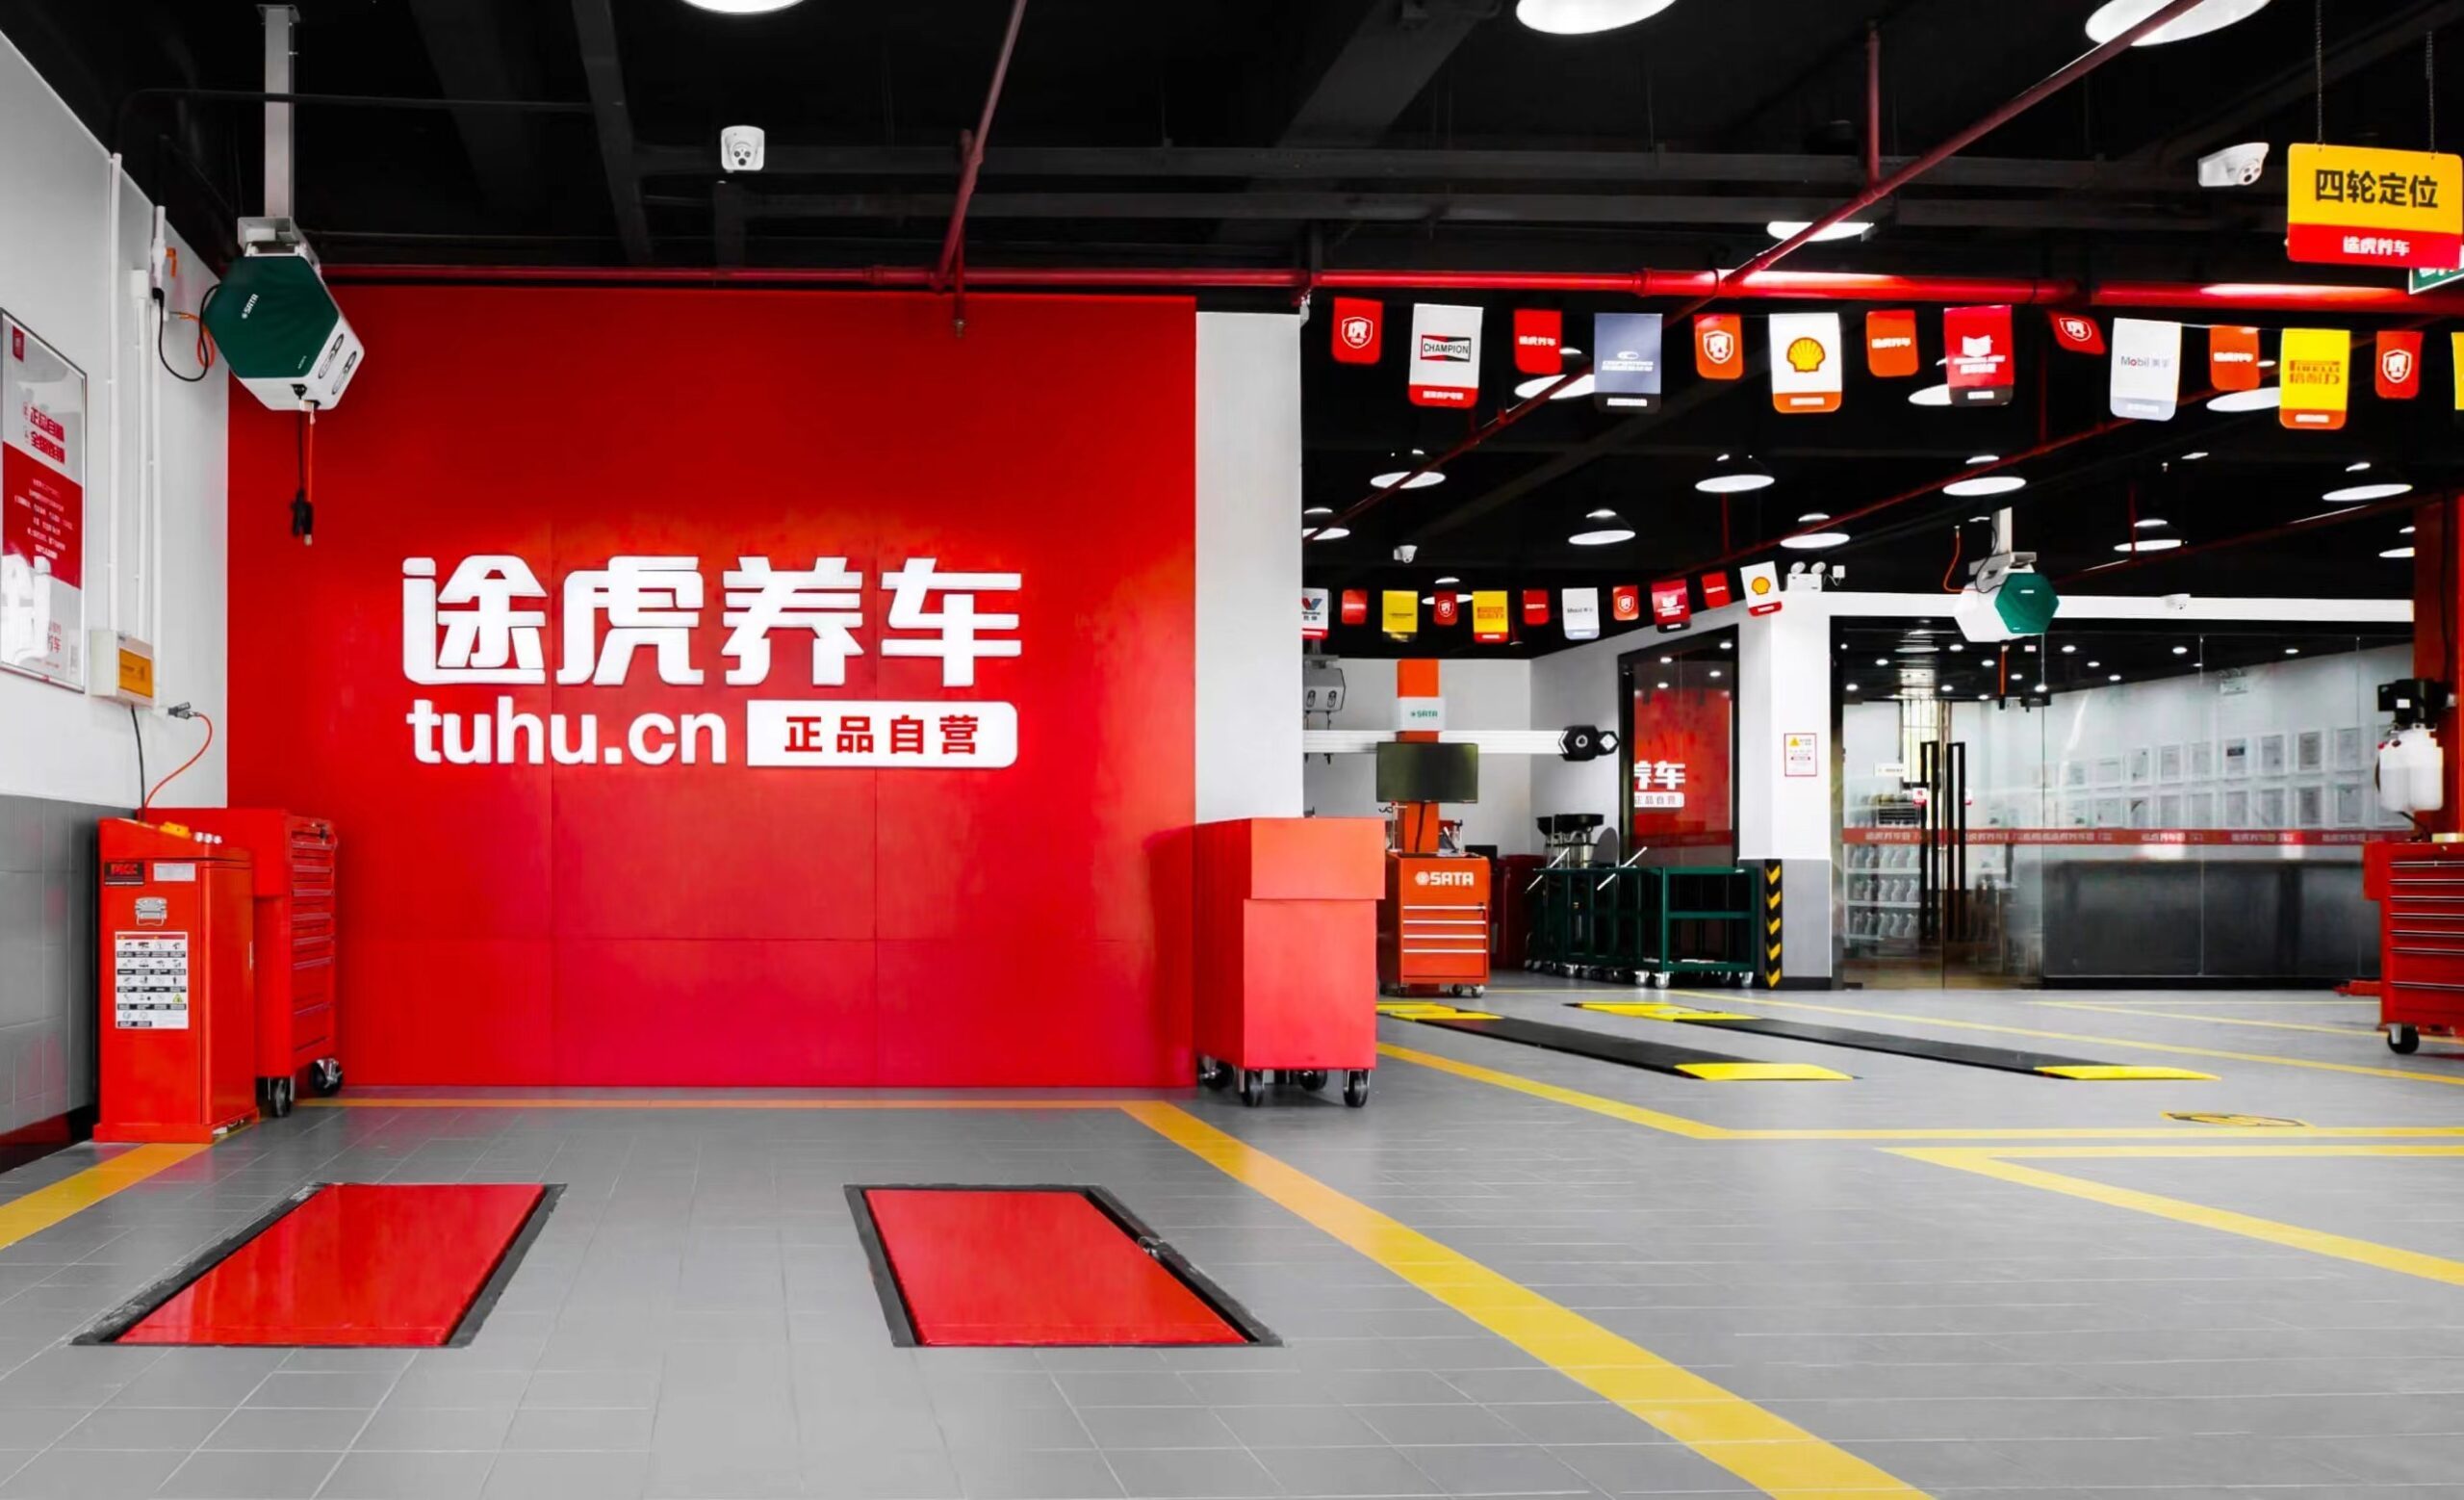 Car maintenance service startup Tuhu Car to raise $146m in HK IPO: sources